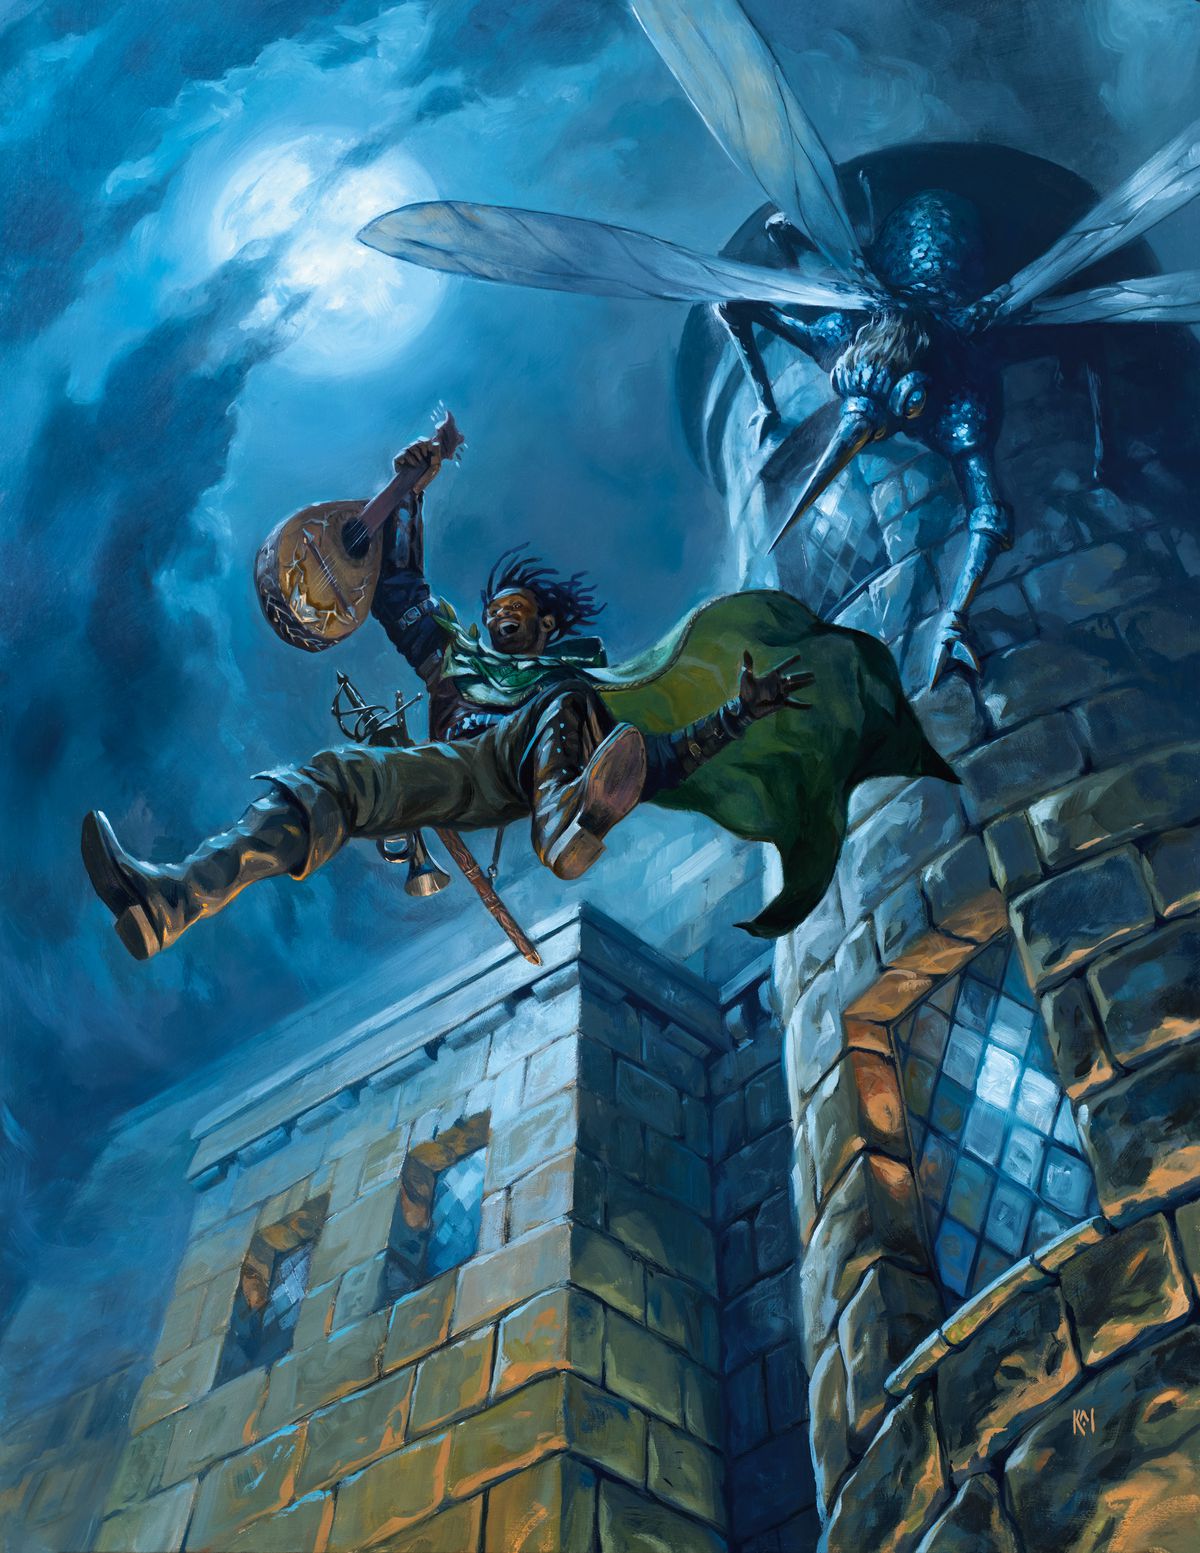 An adventurer with a horn on his belt leaps from a window, chased by a giant fly creature. A mandolin is in his hand and his expression is joyous.